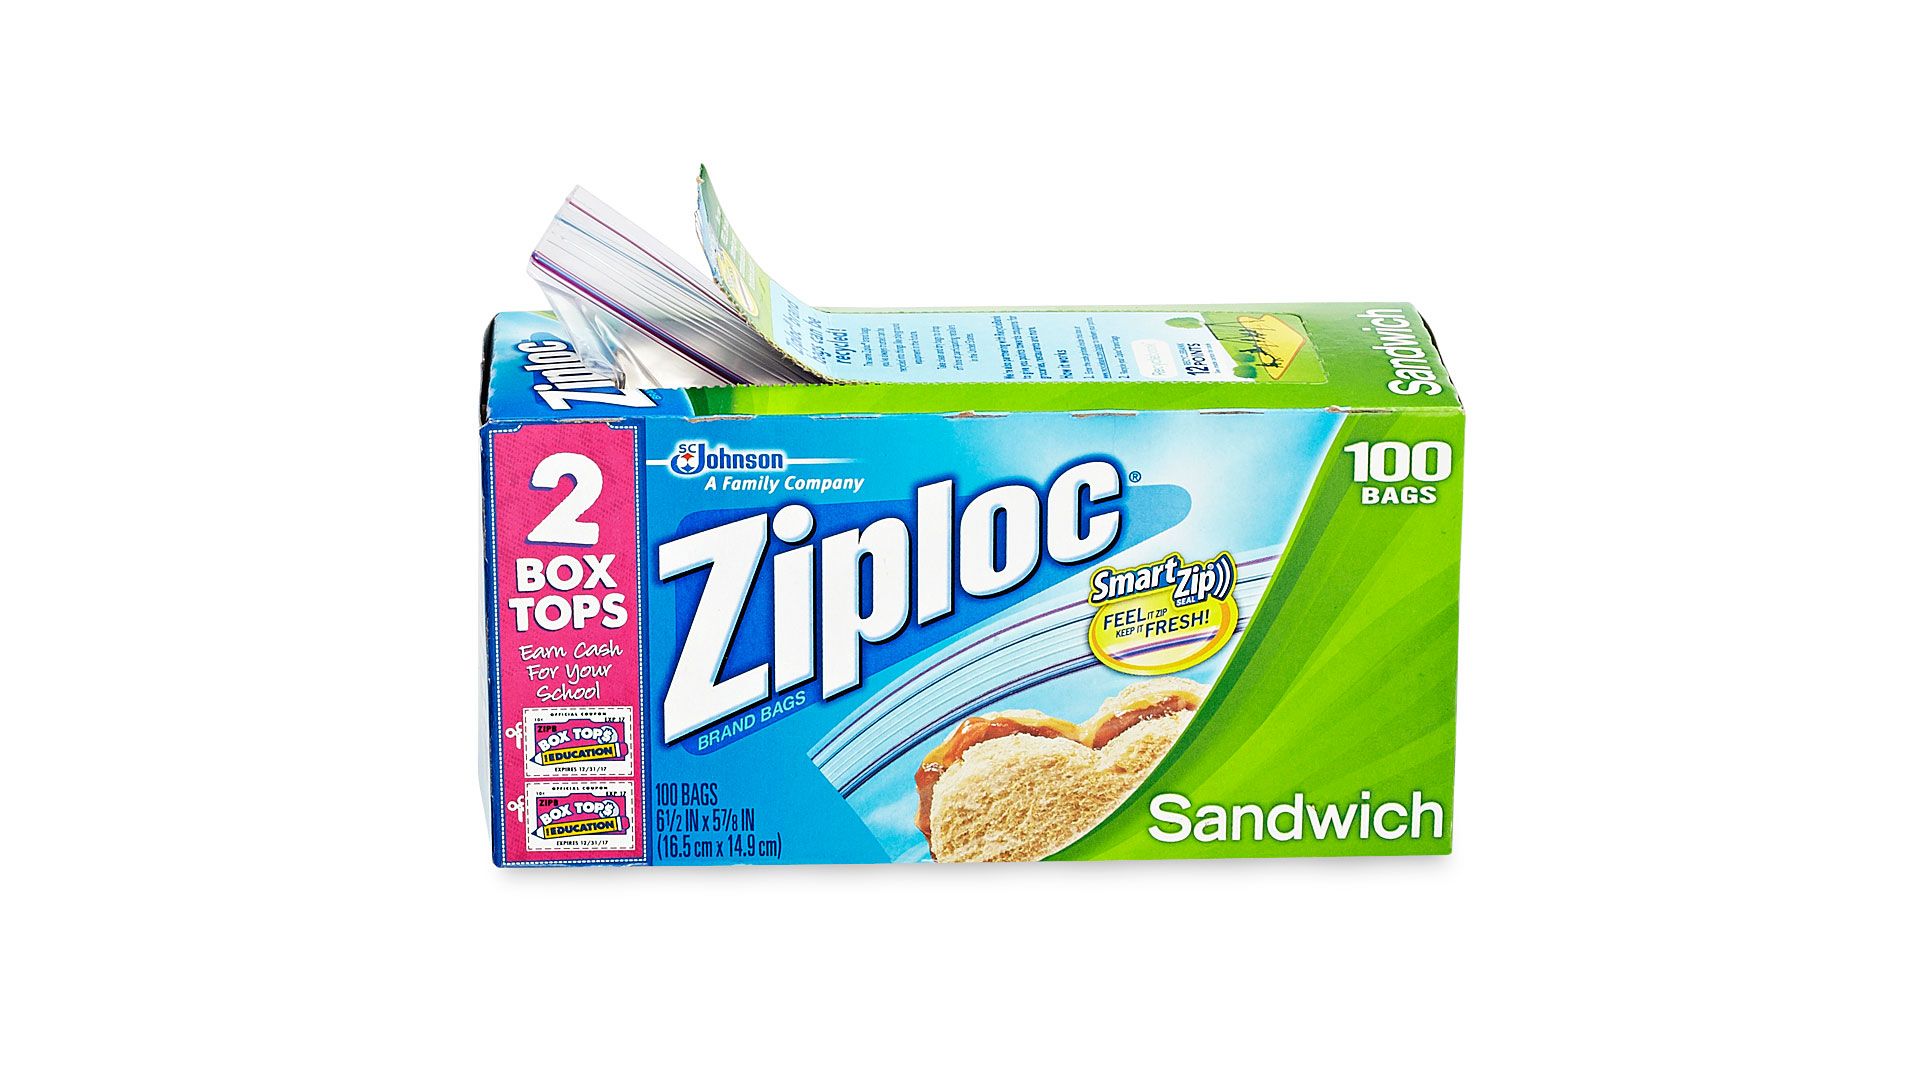 The History of Ziploc Bags - 2014 Hall of Fame Winner